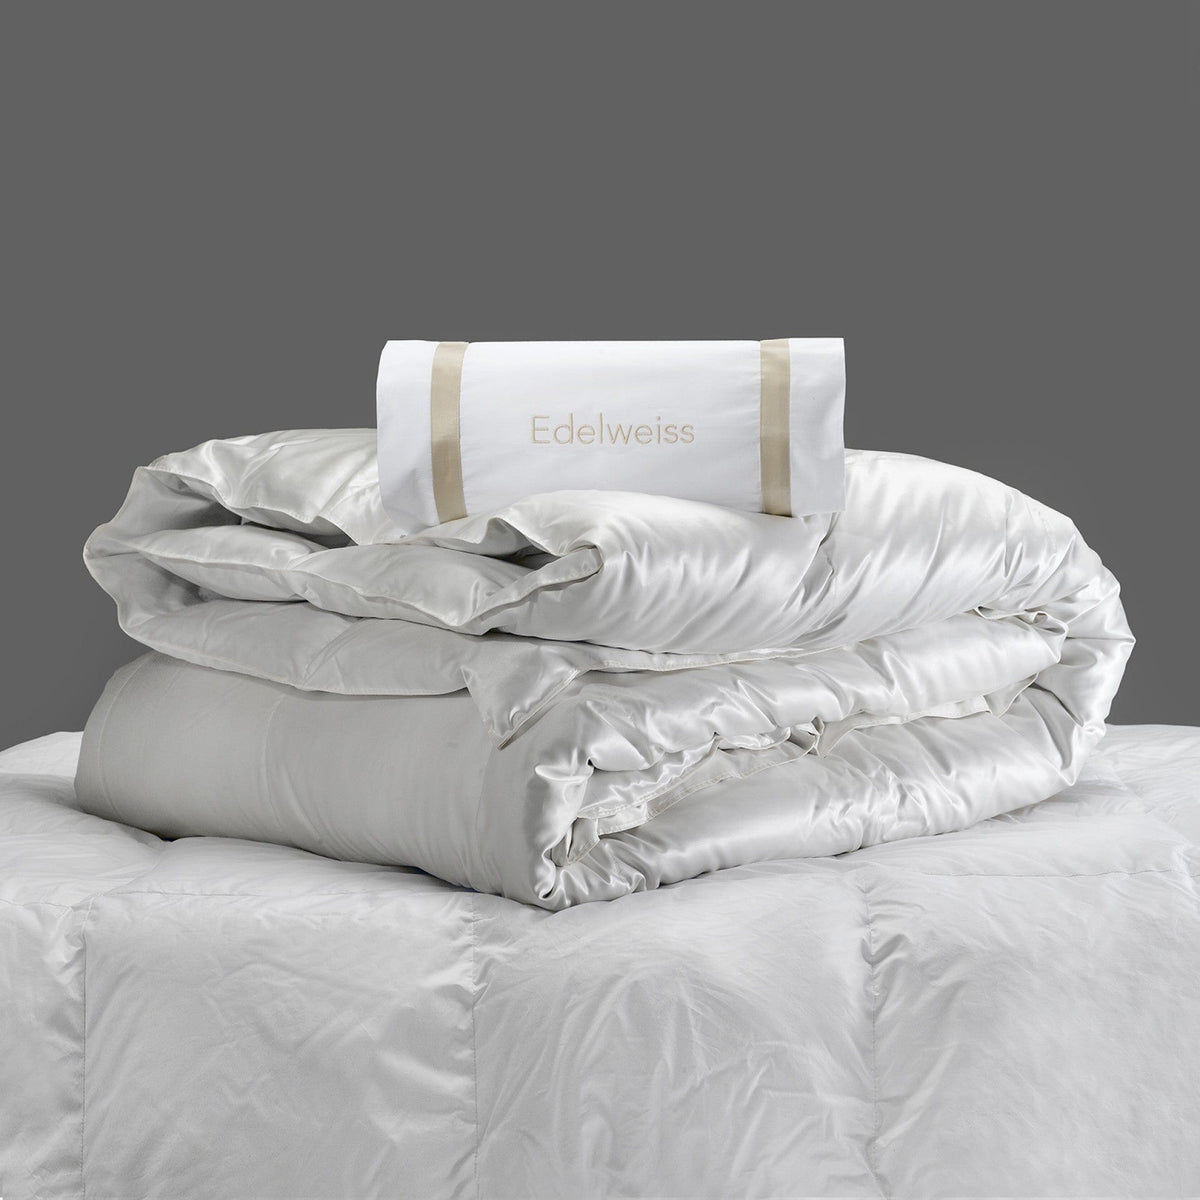 Edelweiss Down Comforter by Matouk